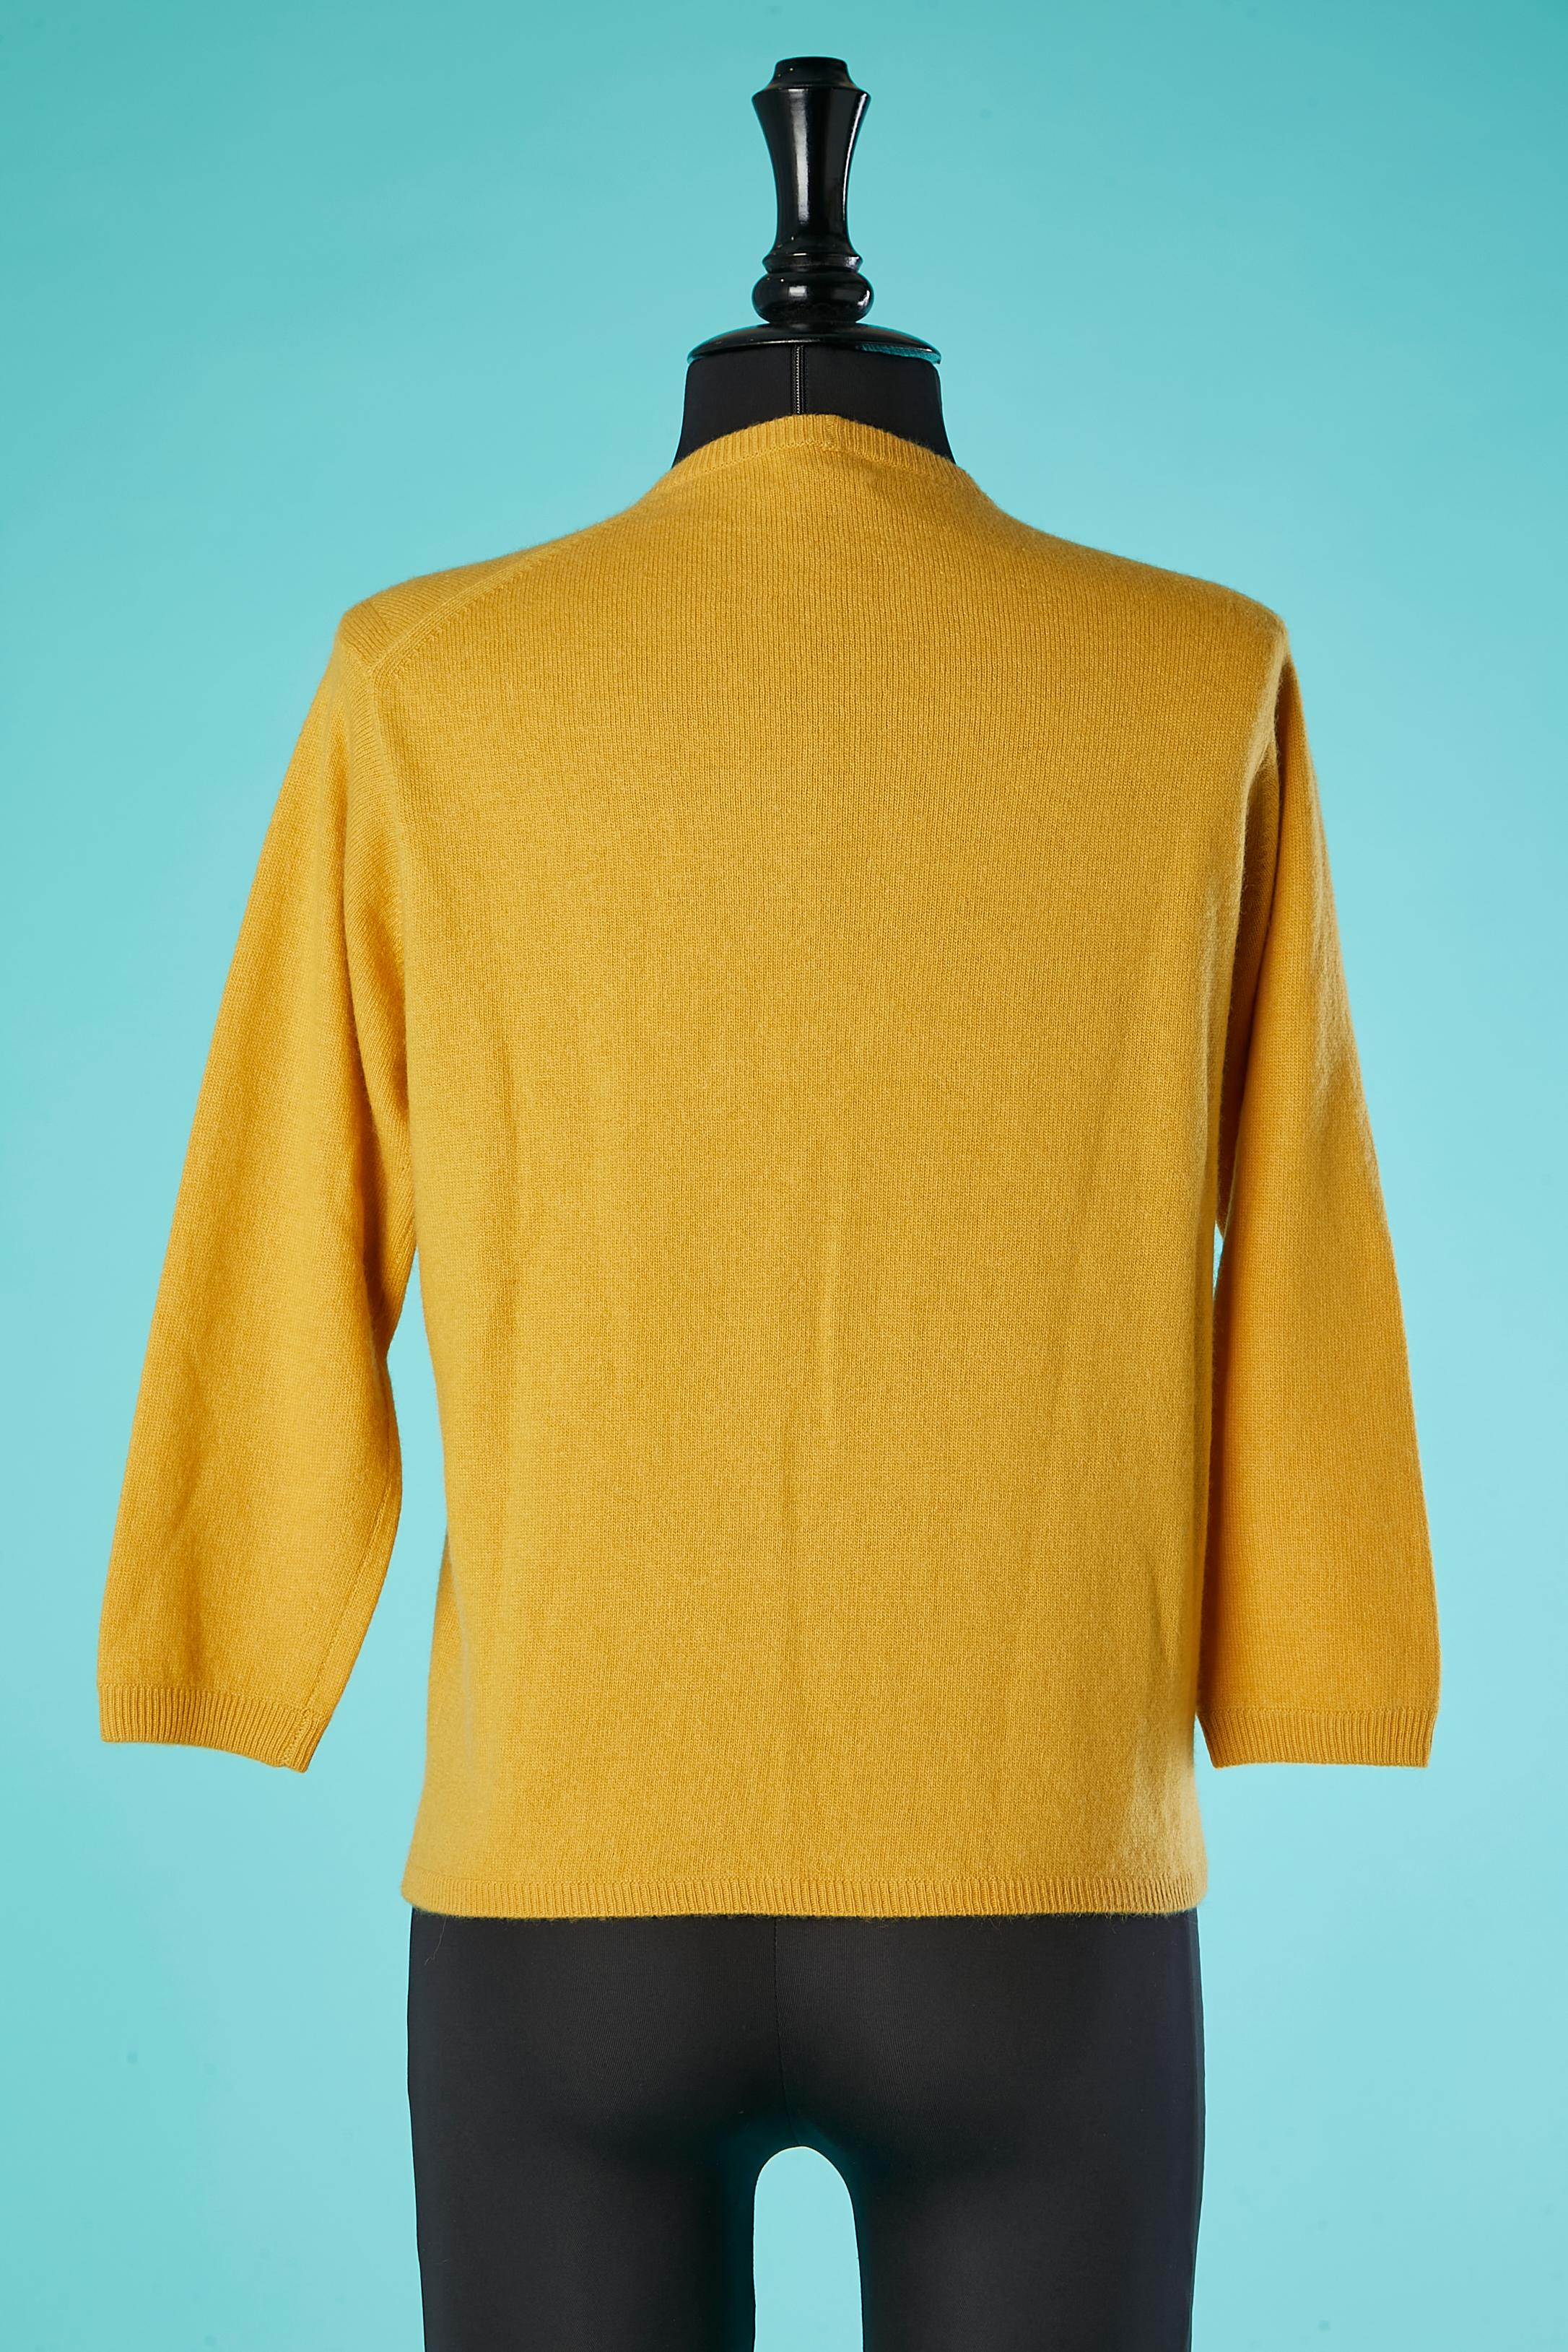 Women's Mustard and navy cashmere knit Trompe-l'oeil cardigan Roberta by R. Di Camarino For Sale